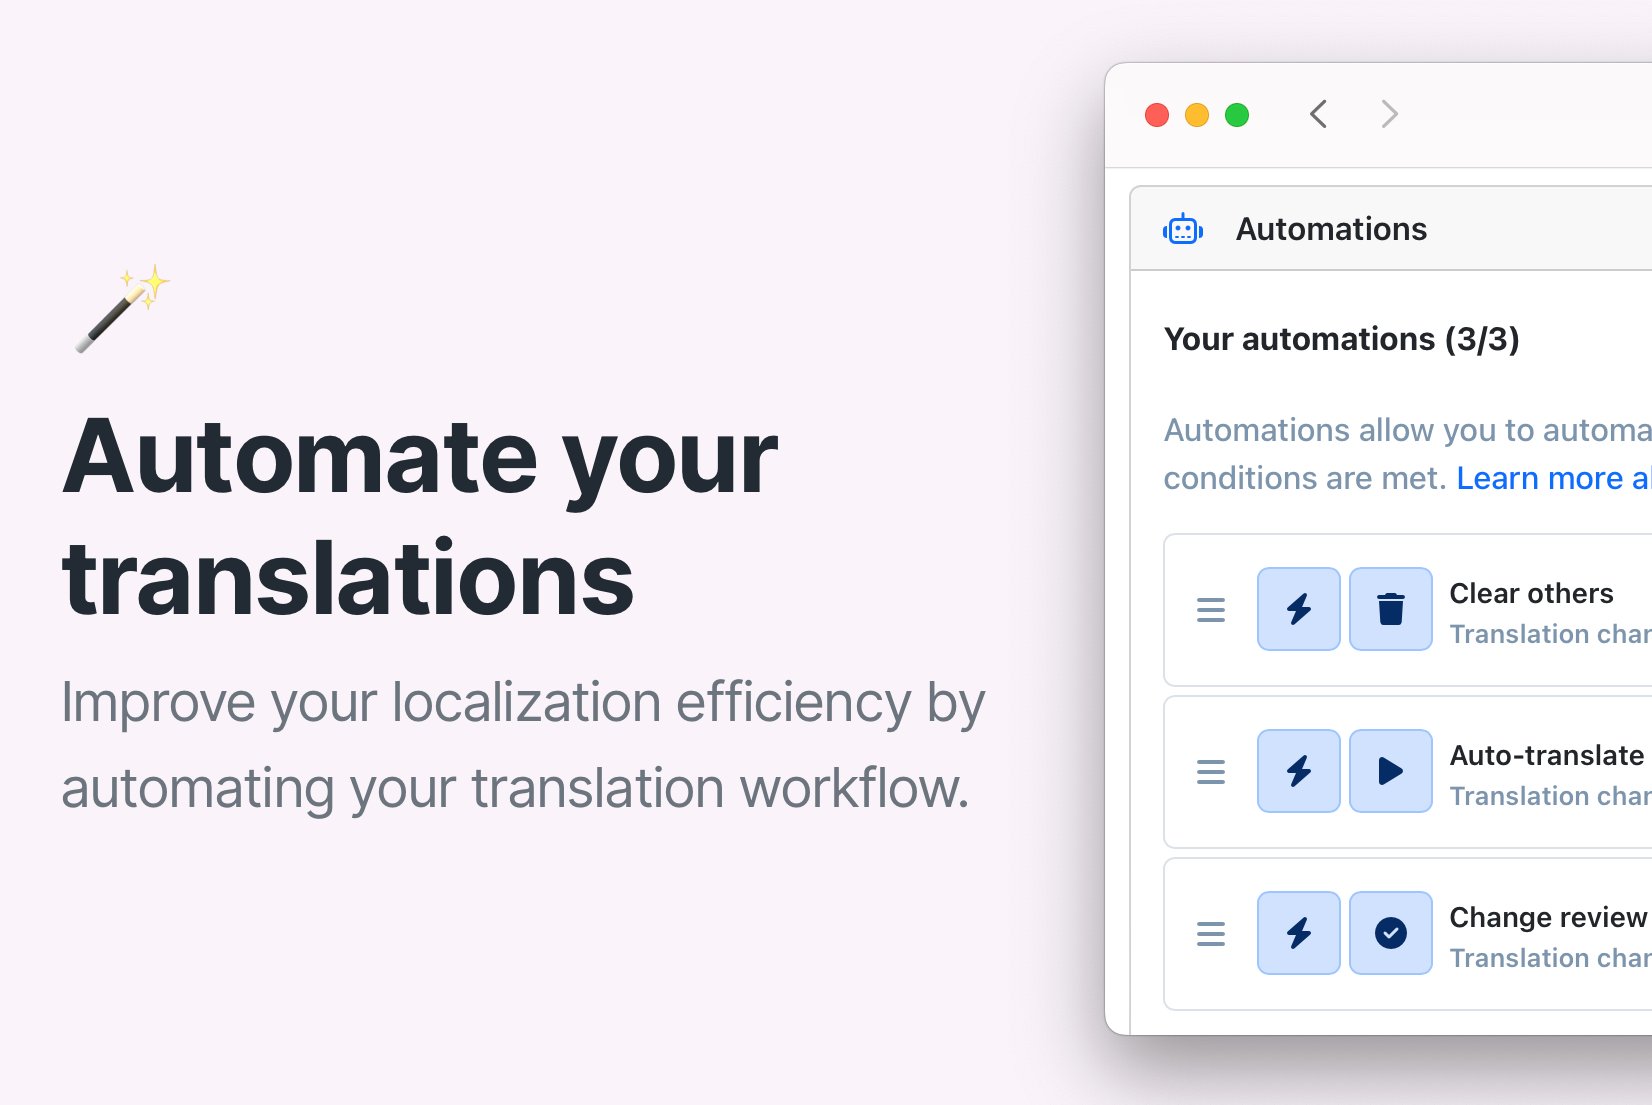 Automate your translation workflow with Automations